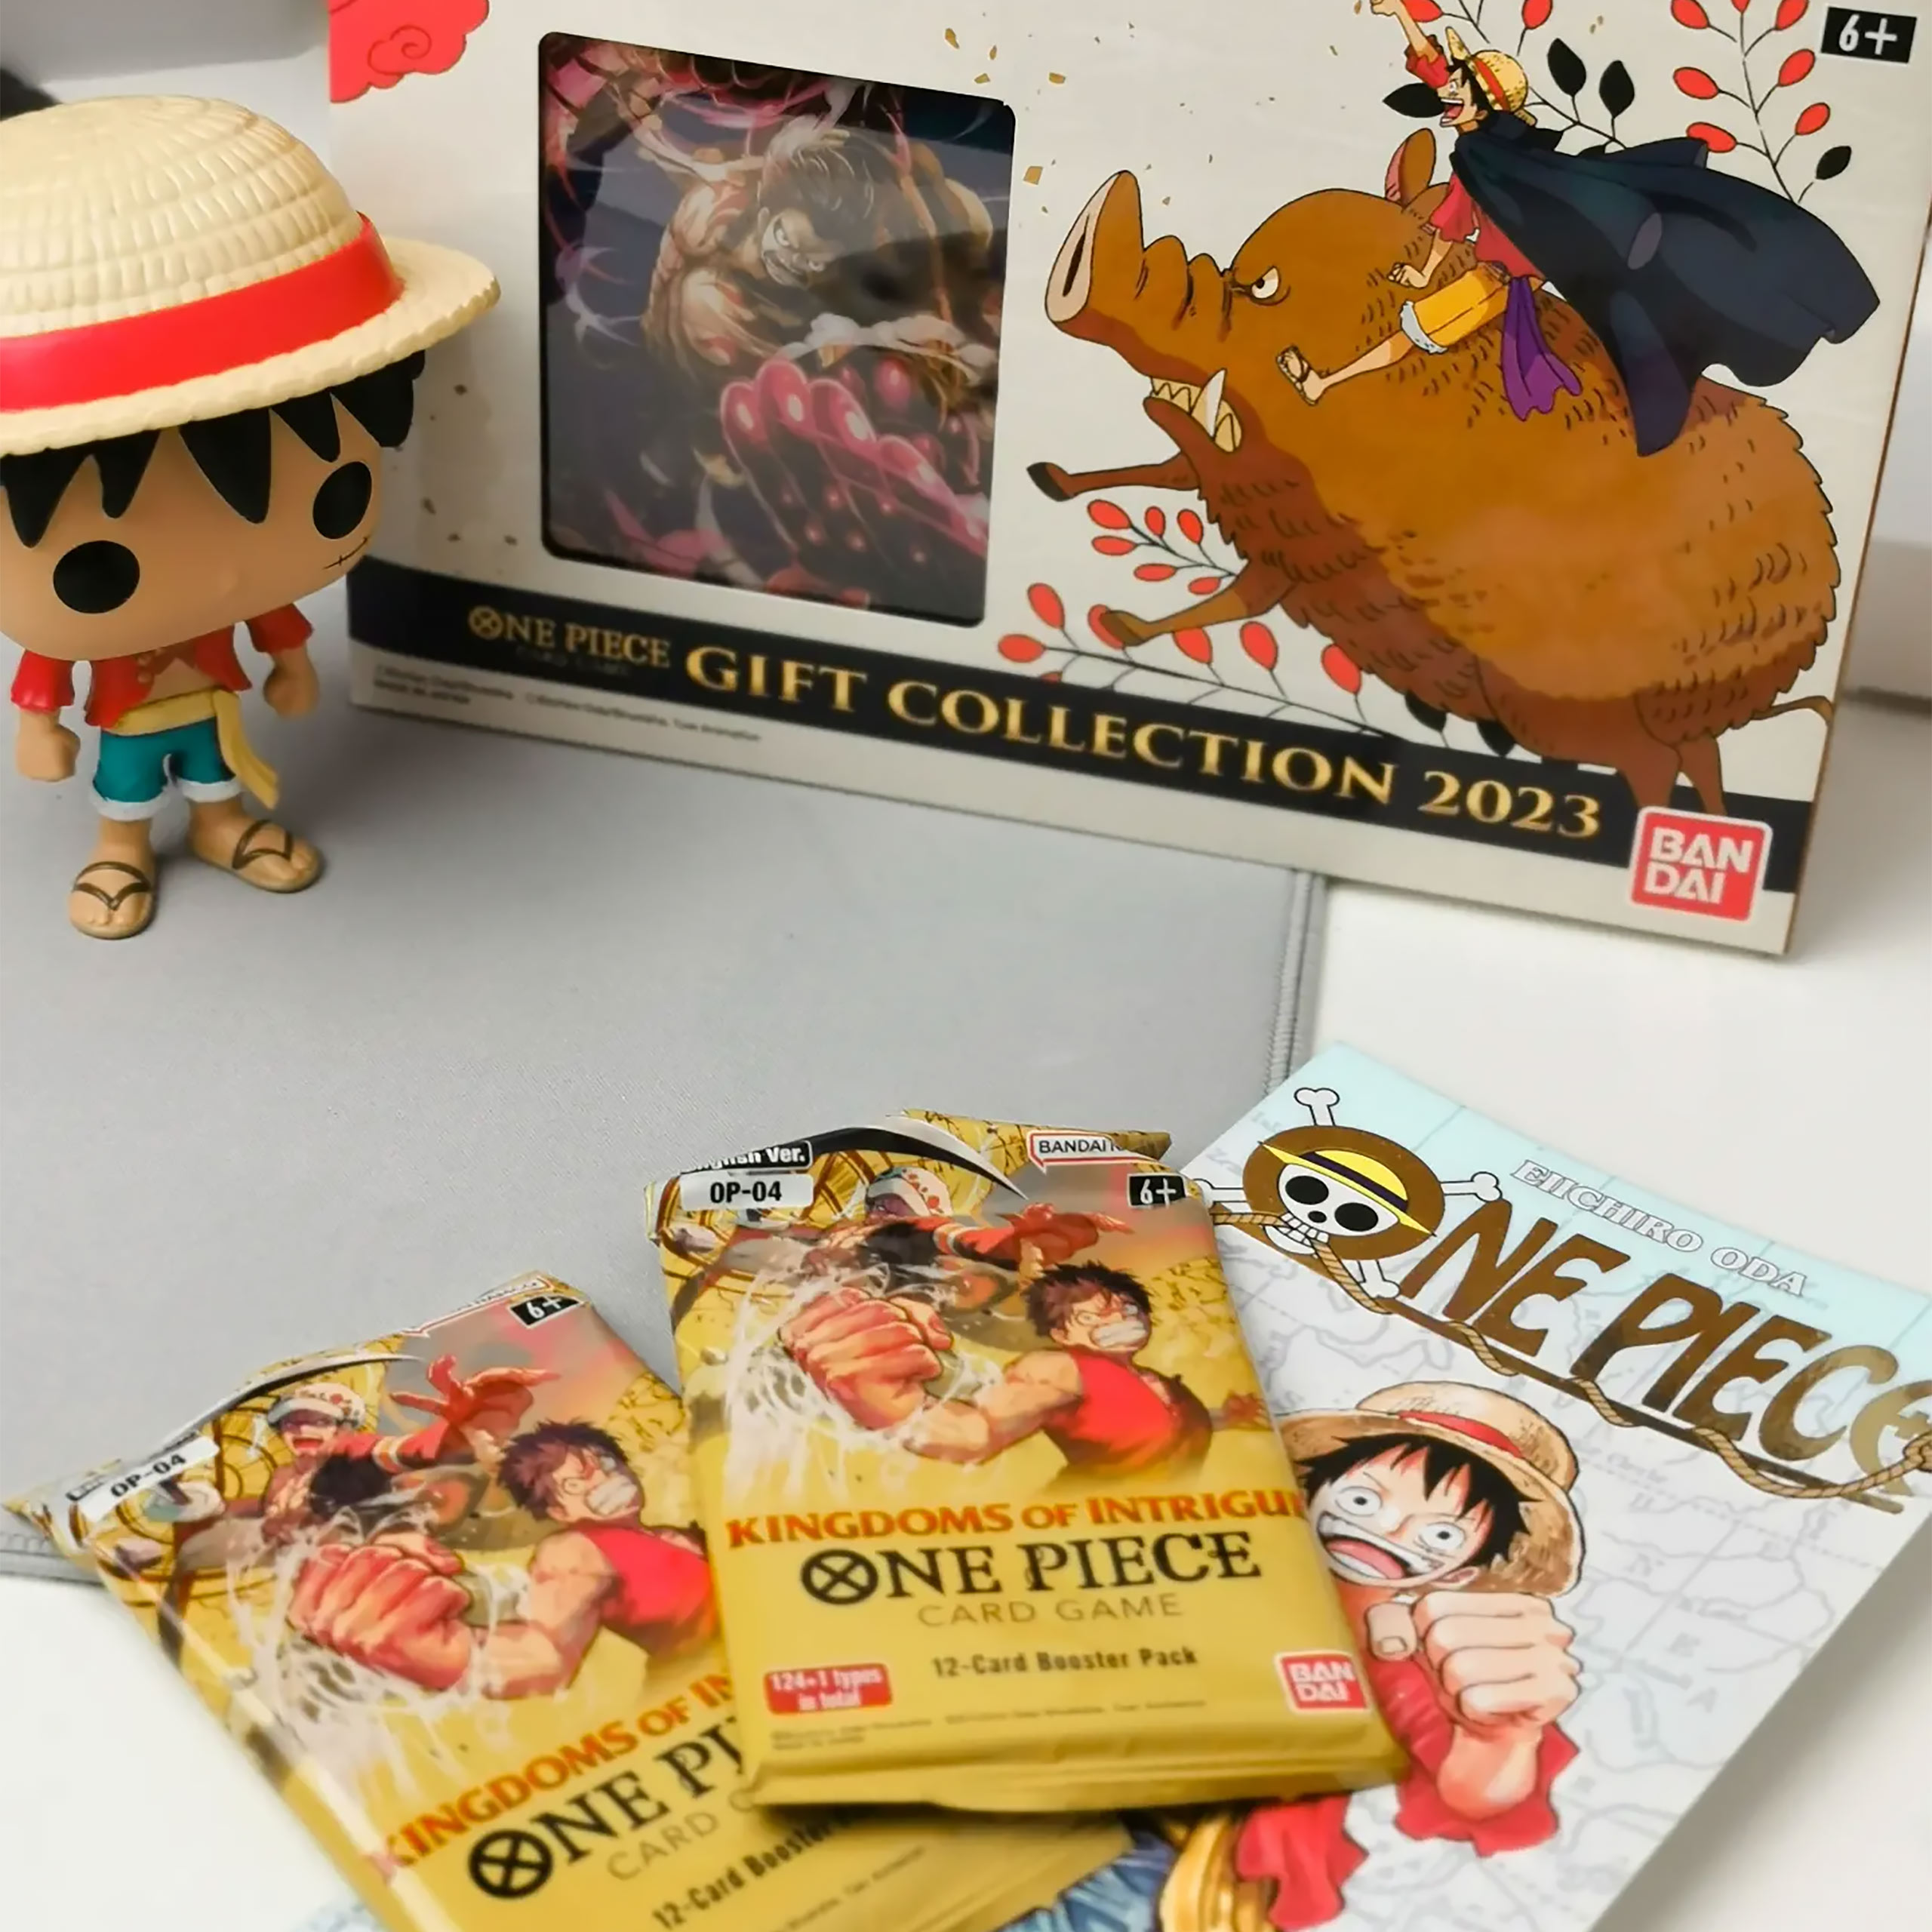 One Piece Card Game - Gift Collection 2023 Engelse Versie